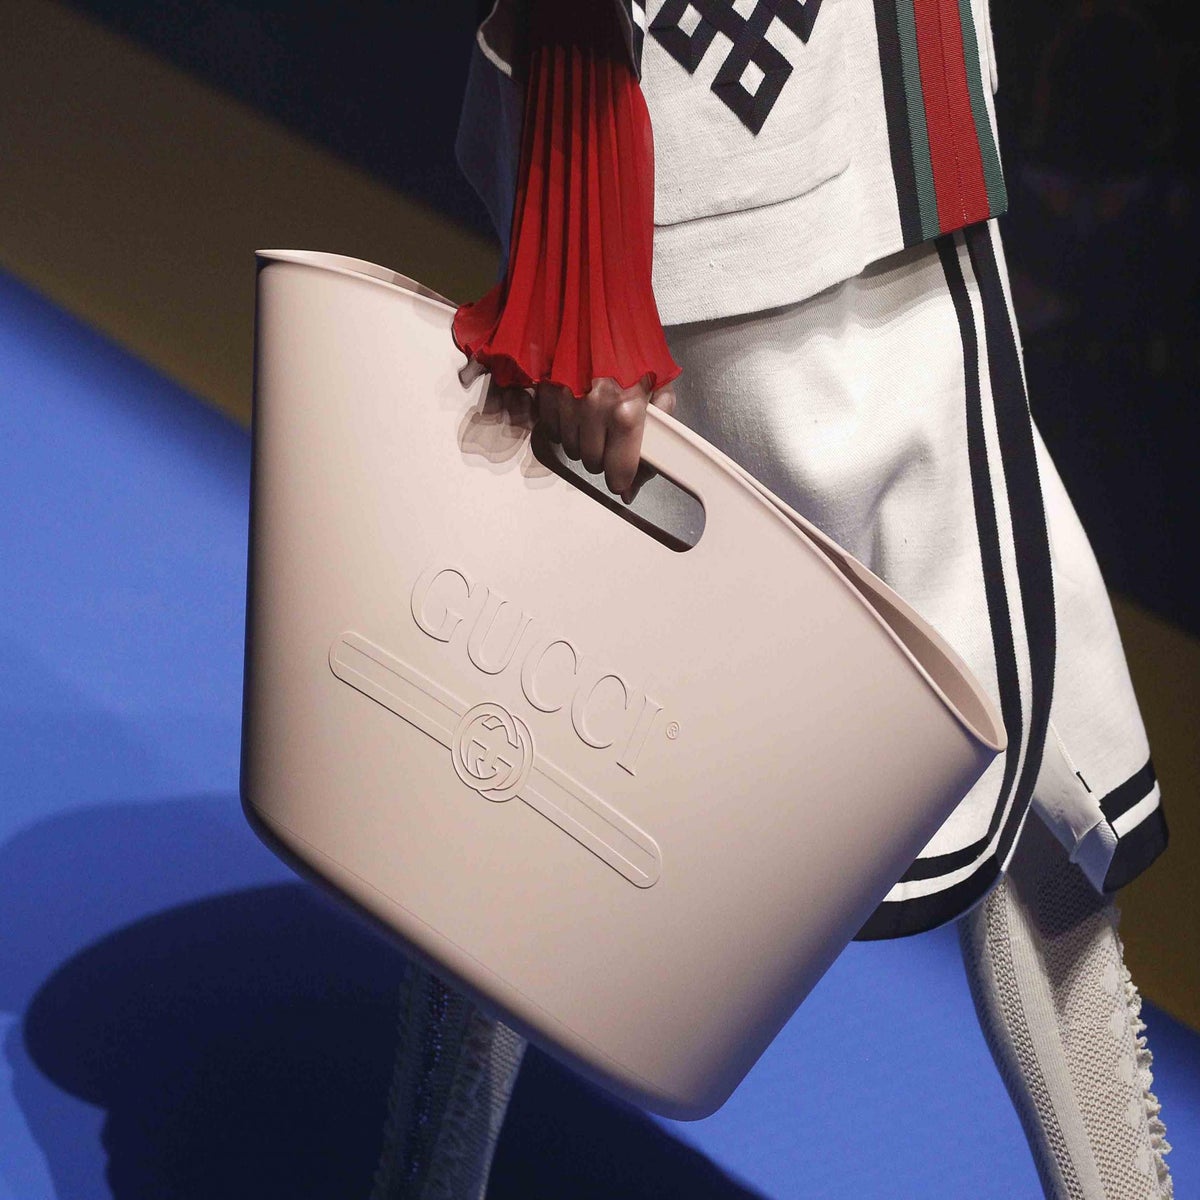 Gucci mocked by fashion fans for selling £700 bag that 'looks like